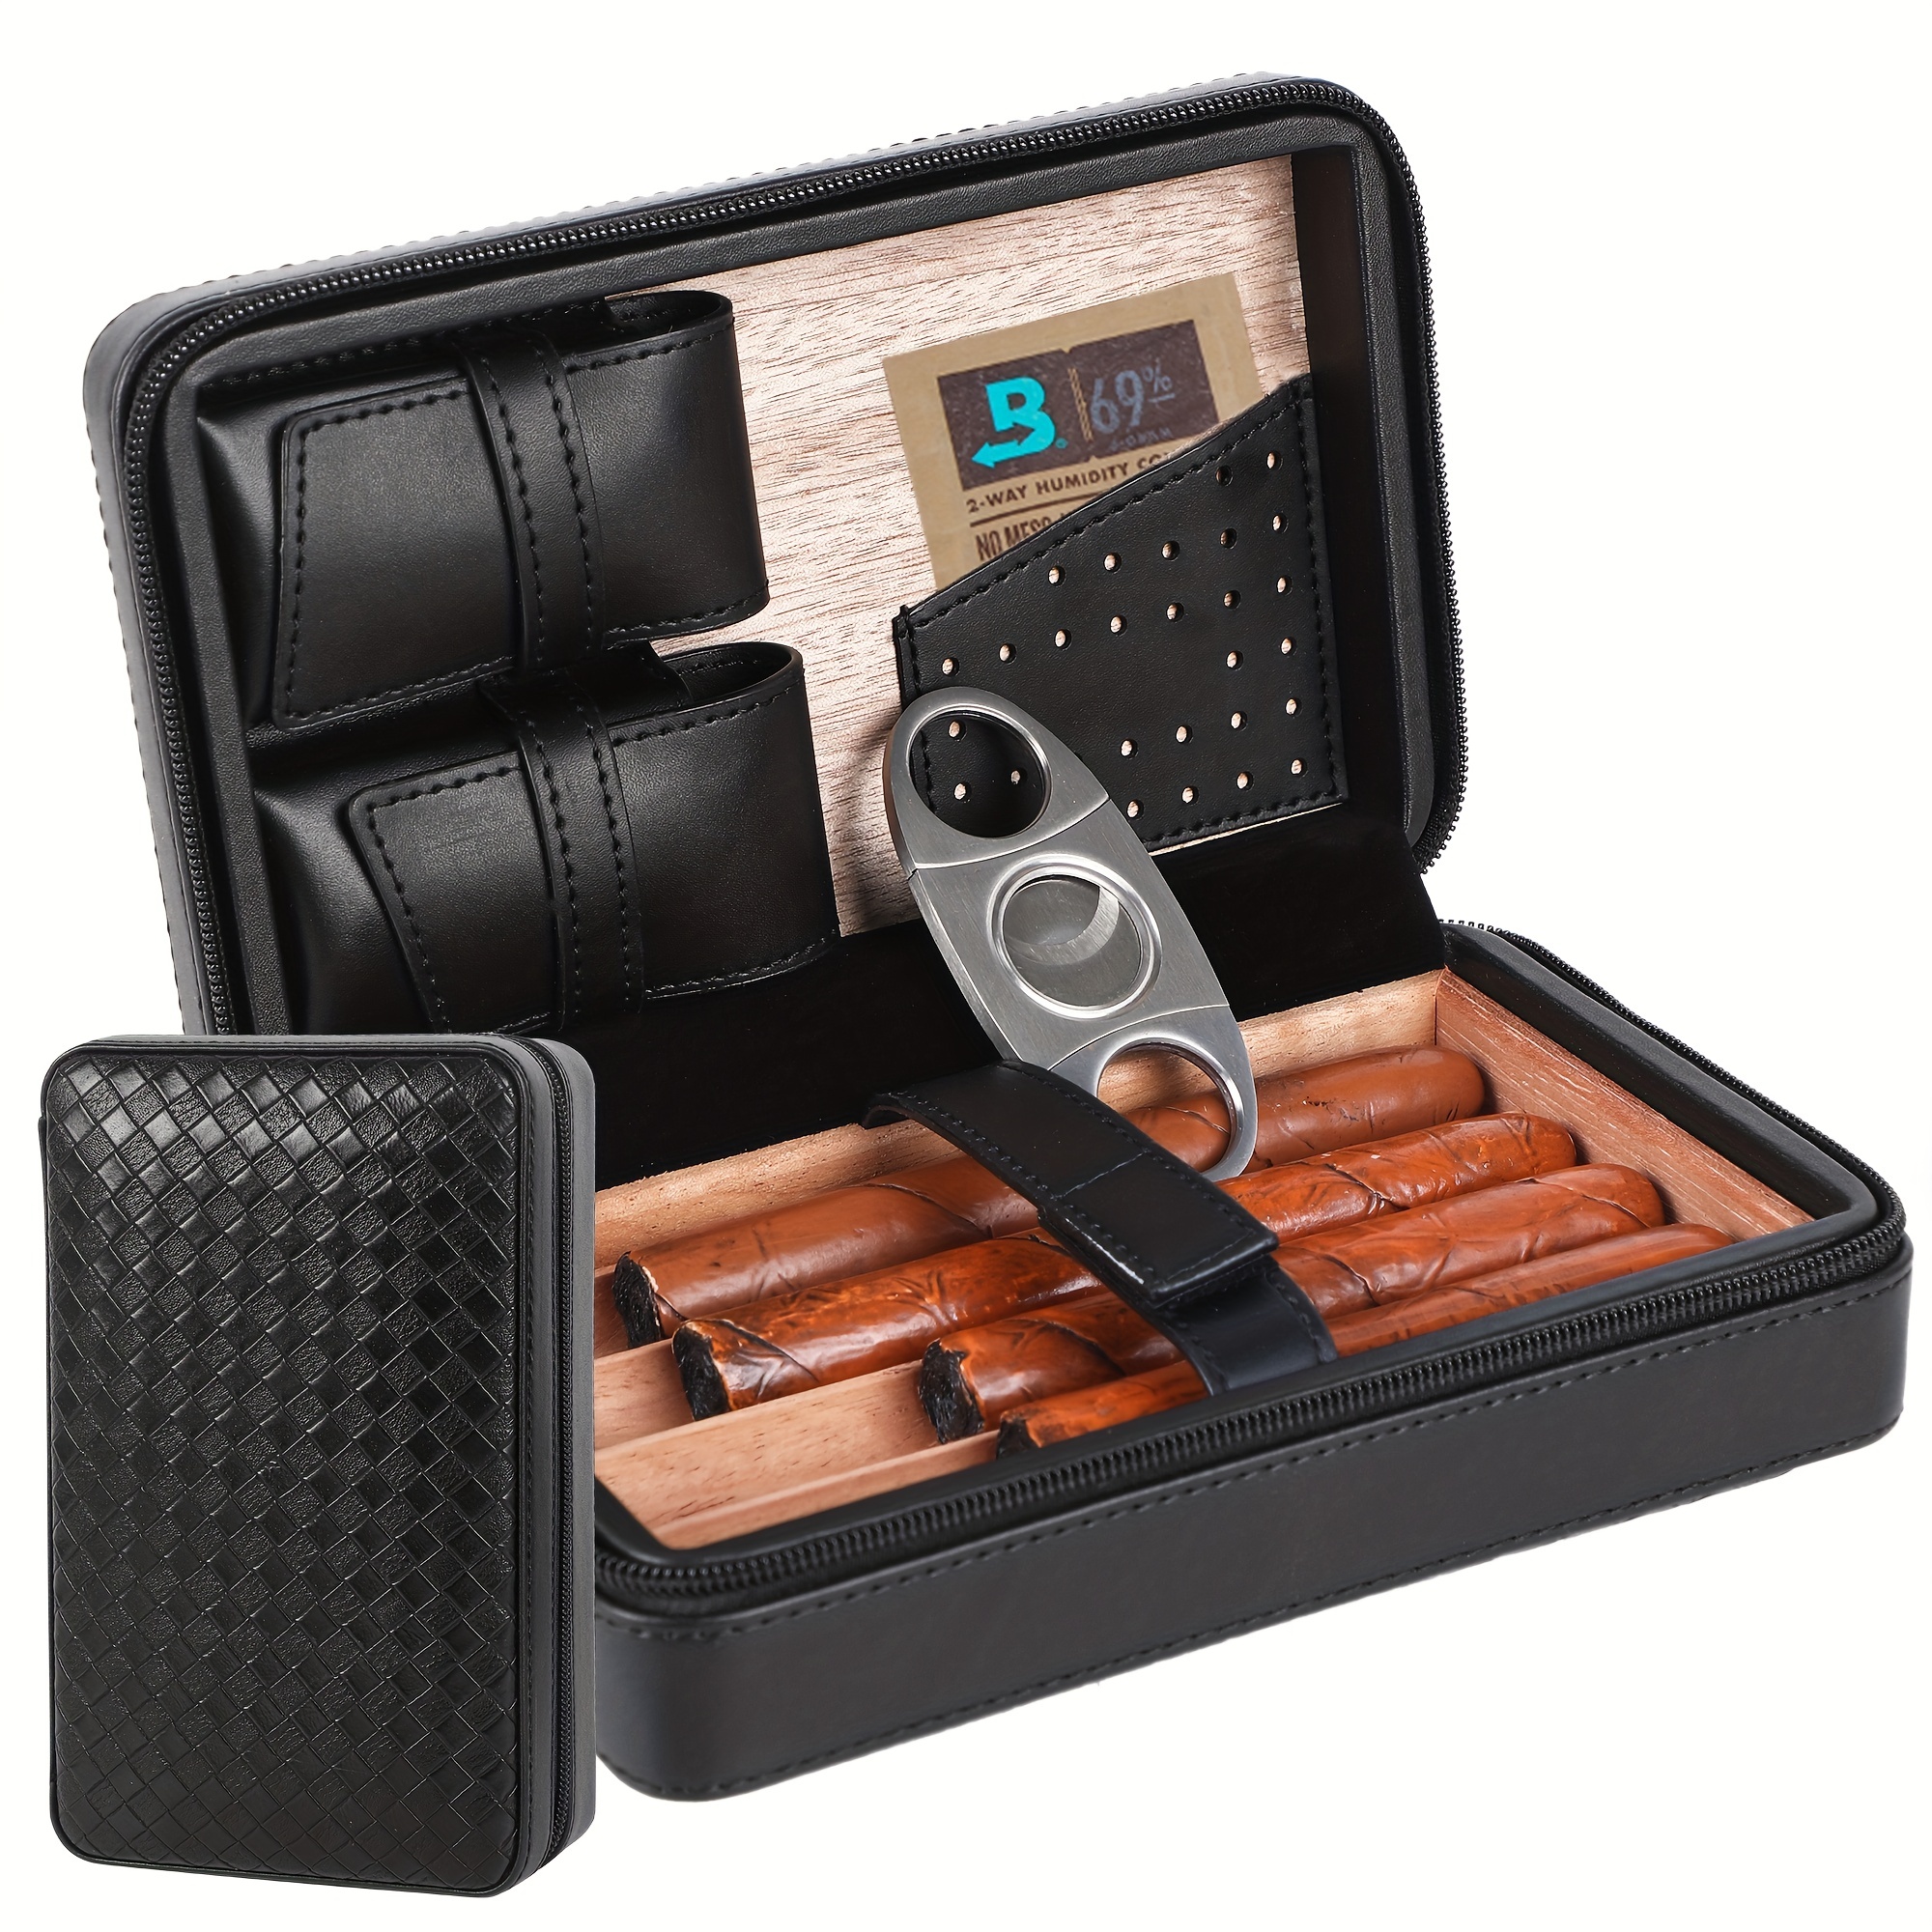 Cigar Case - Travel humidor with Cigar Accessories, Cigar Cutter & Spanish  Cedar & Cigar Holder-Holds up to 5 Cigars -Crushproof, Airtight Seal-Cigars